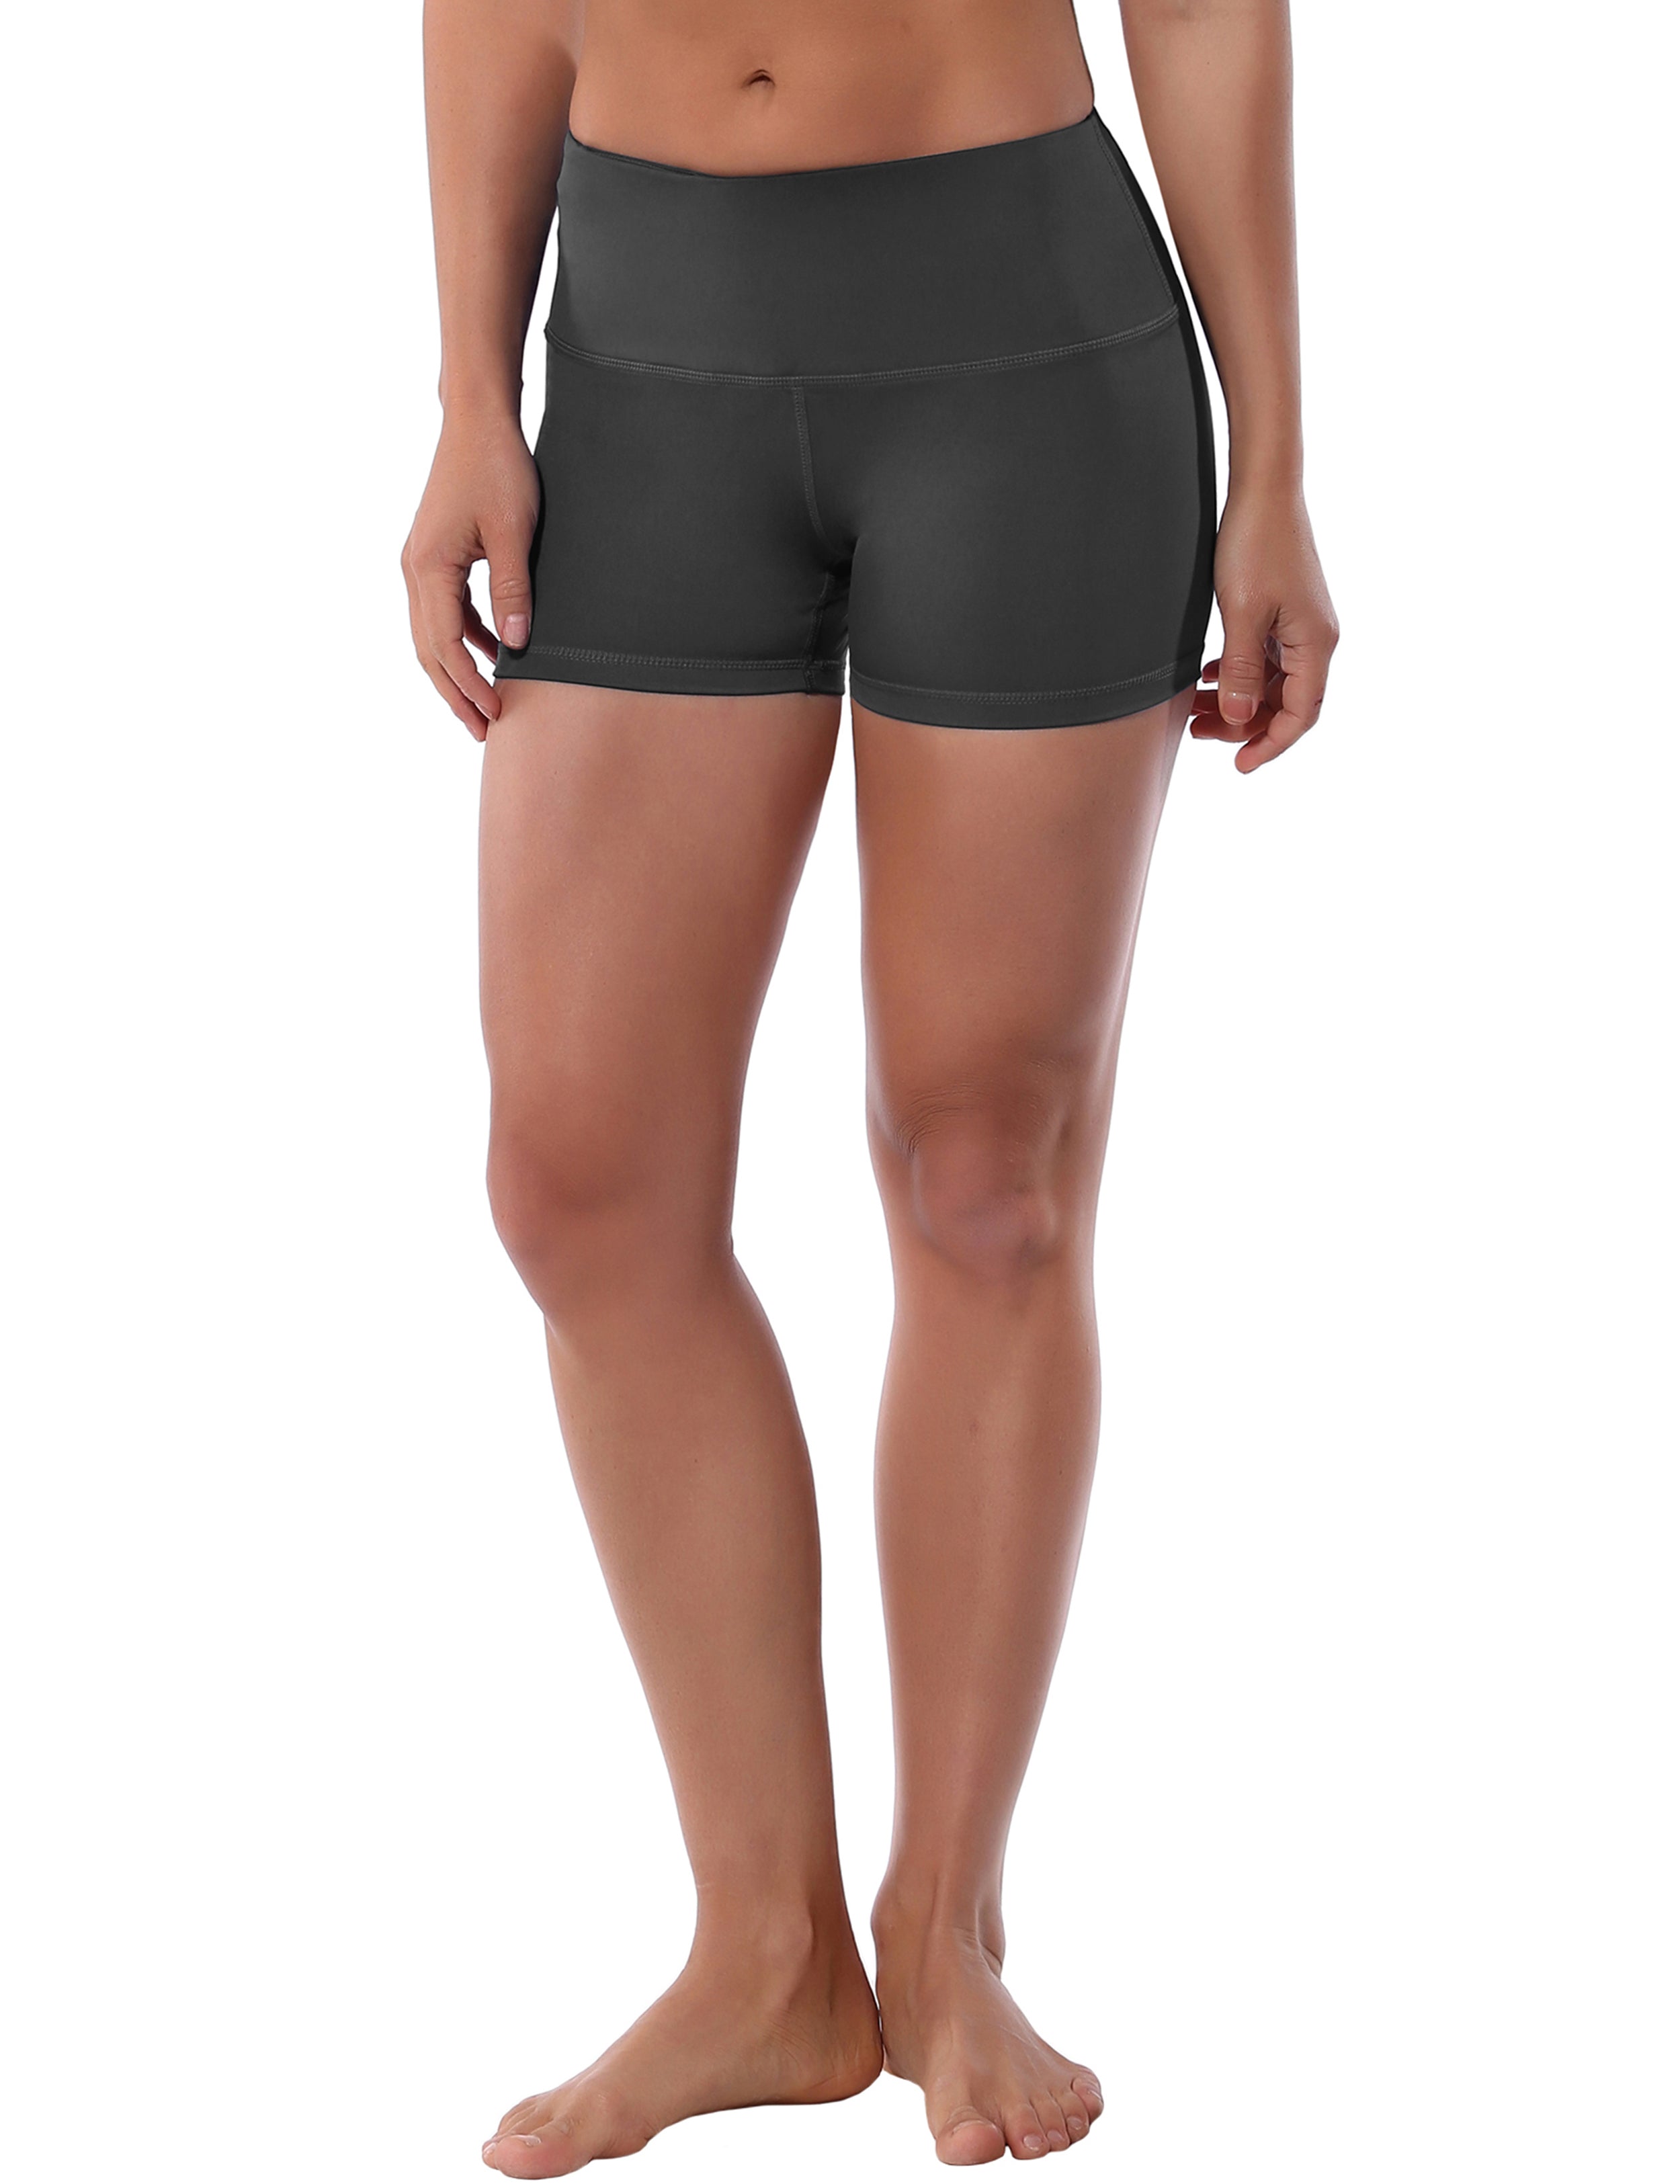 2.5" Golf Shorts shadowcharcoal Softest-ever fabric High elasticity High density 4-way stretch Fabric doesn't attract lint easily No see-through Moisture-wicking Machine wash 75% Nylon, 25% Spandex